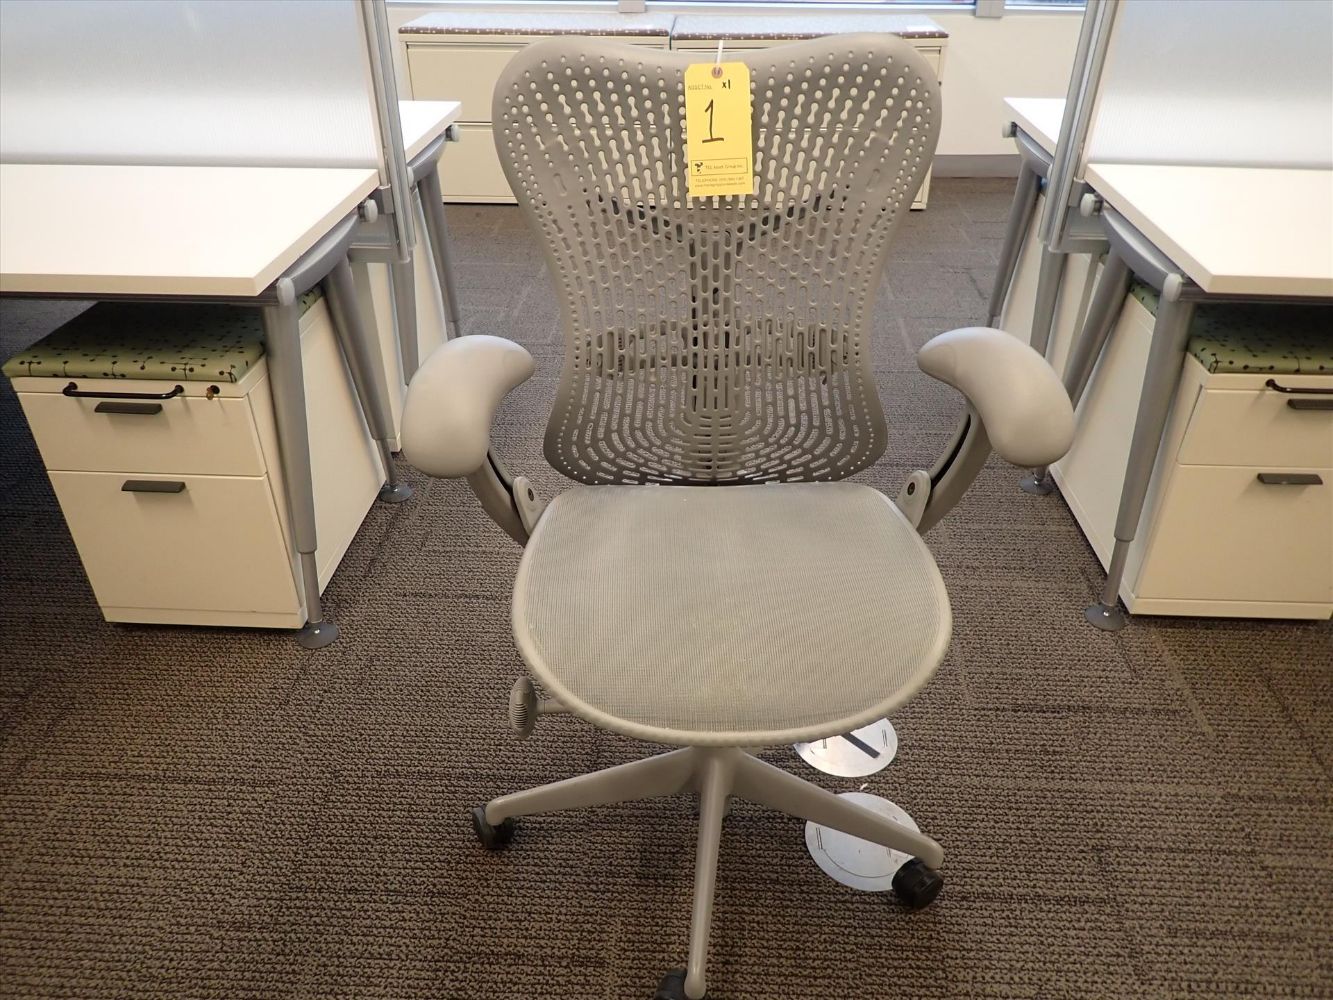 INVENTORY OF OFFICE FURNITURE FEATURING HERMAN MILLER CHAIRS, TABLES, OFFICE SUITES AND MORE